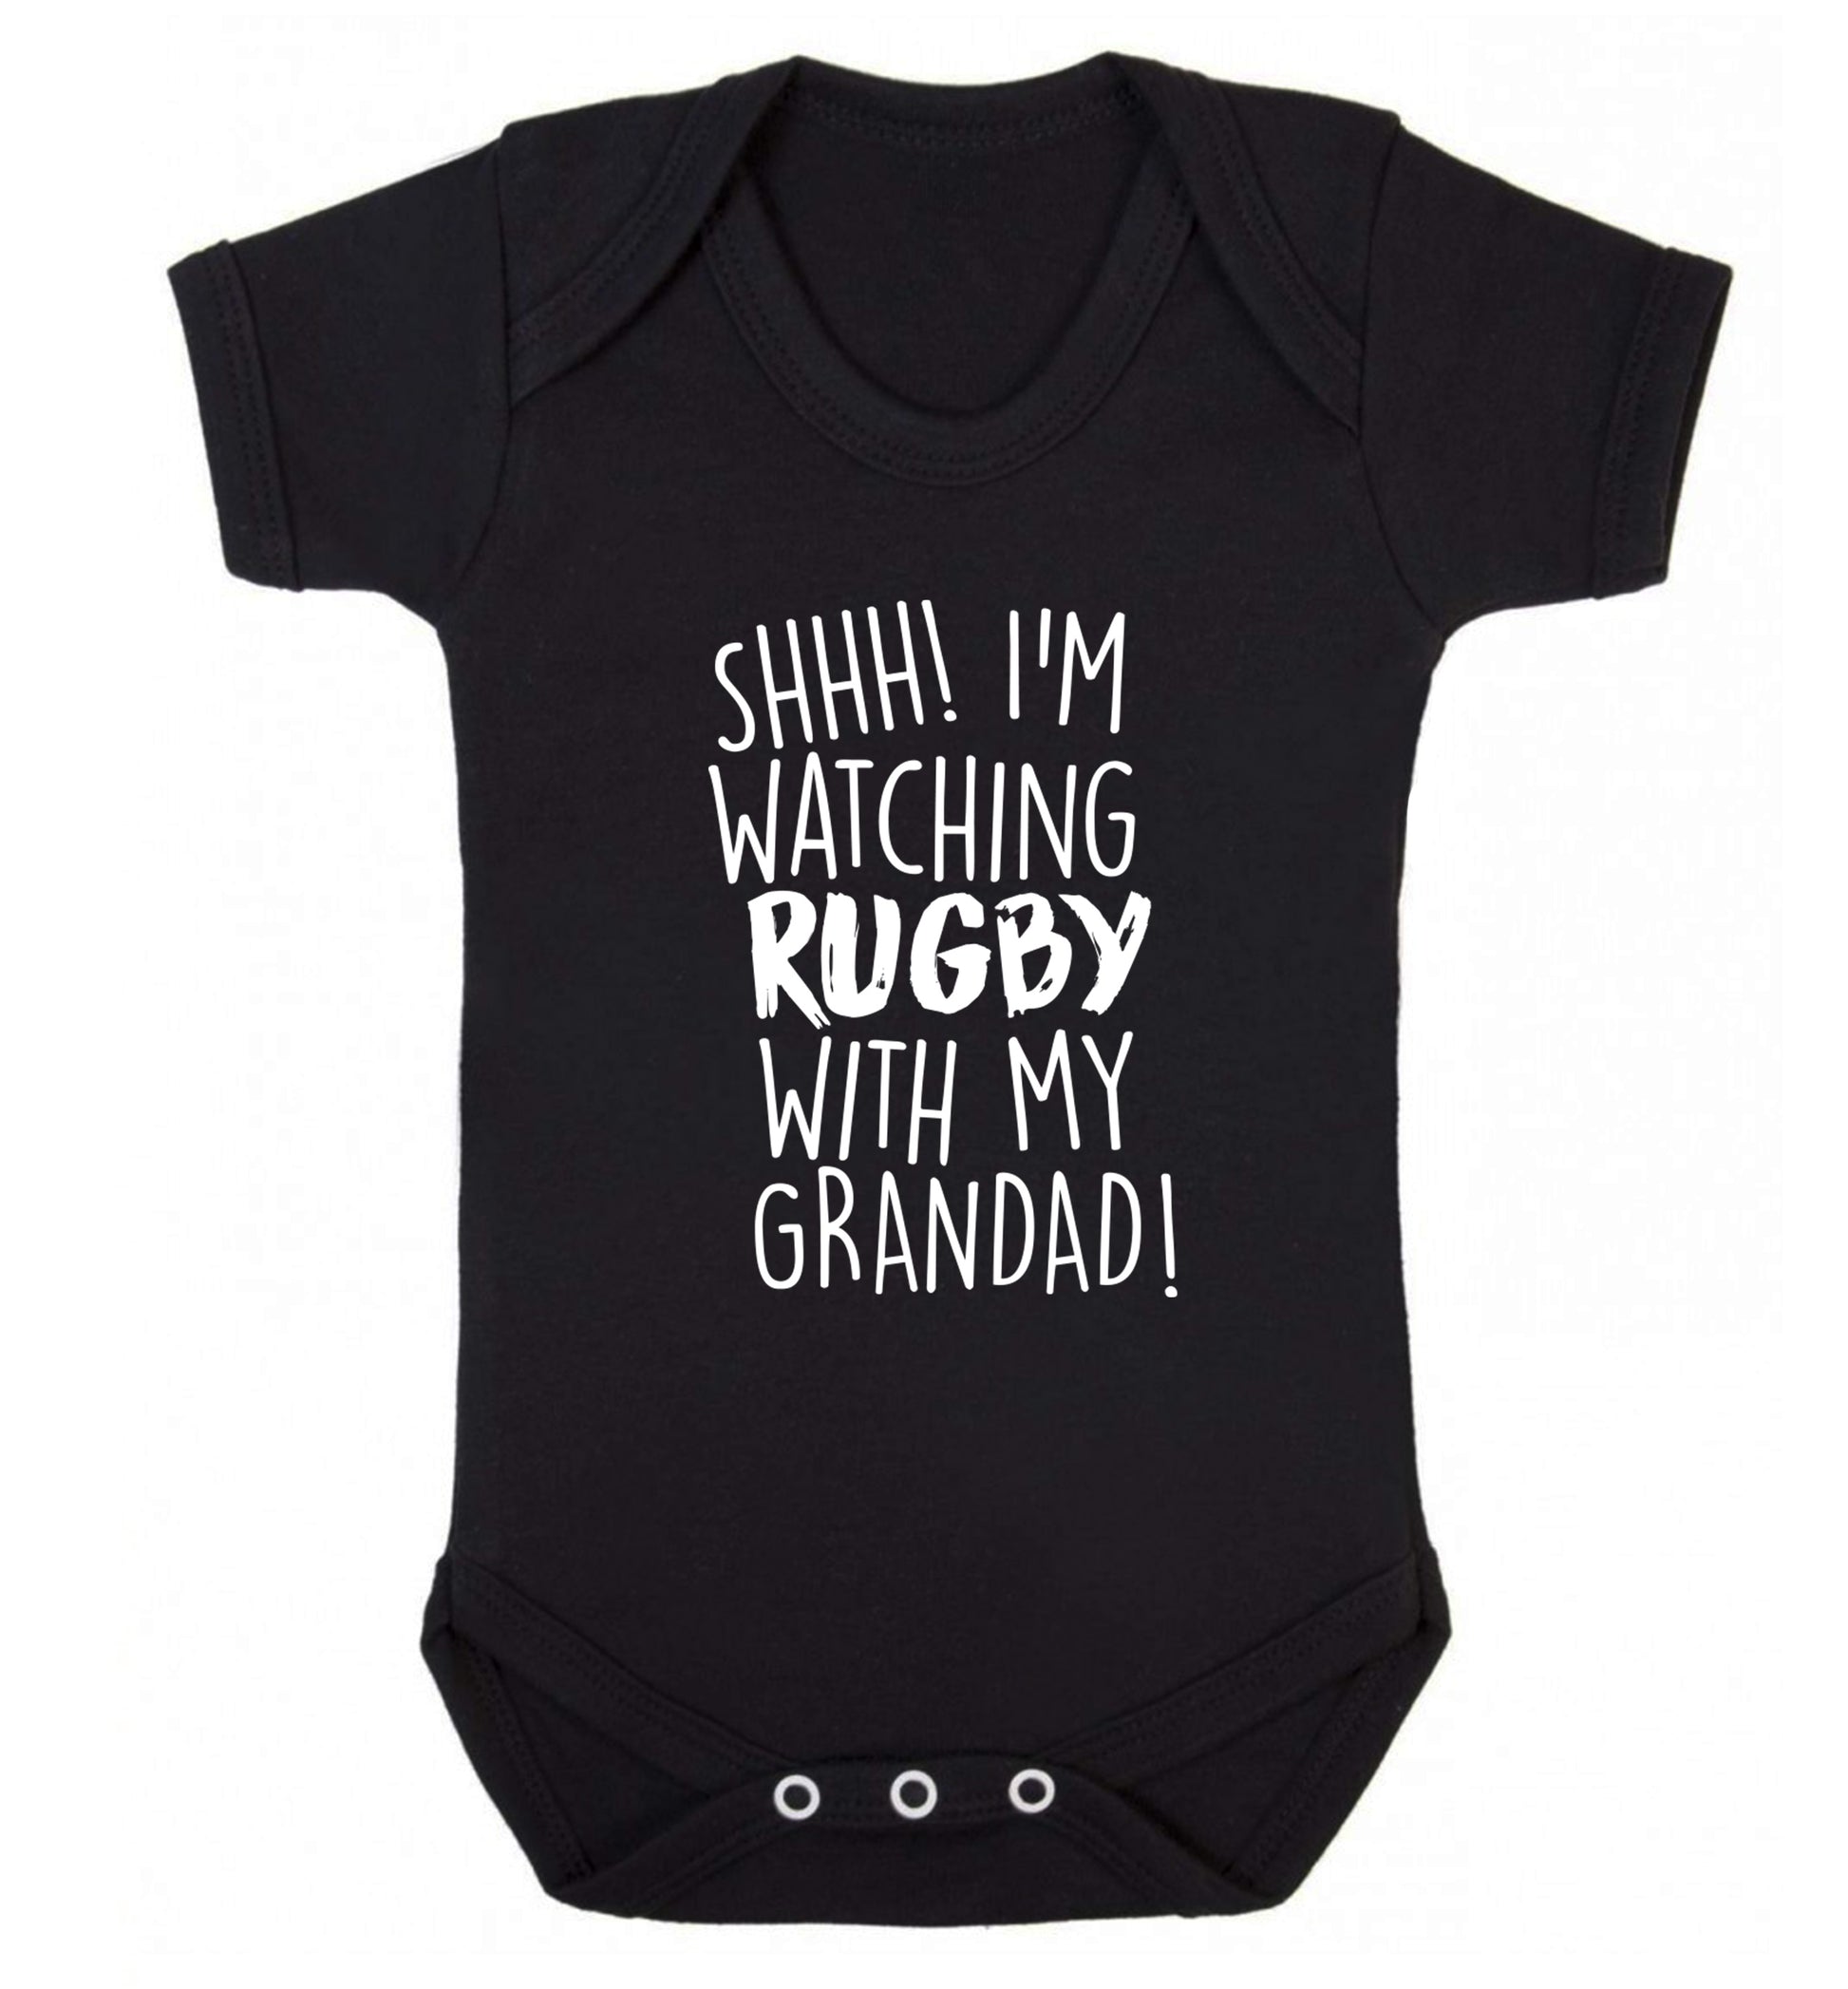 Shh I'm watching rugby with my grandad Baby Vest black 18-24 months